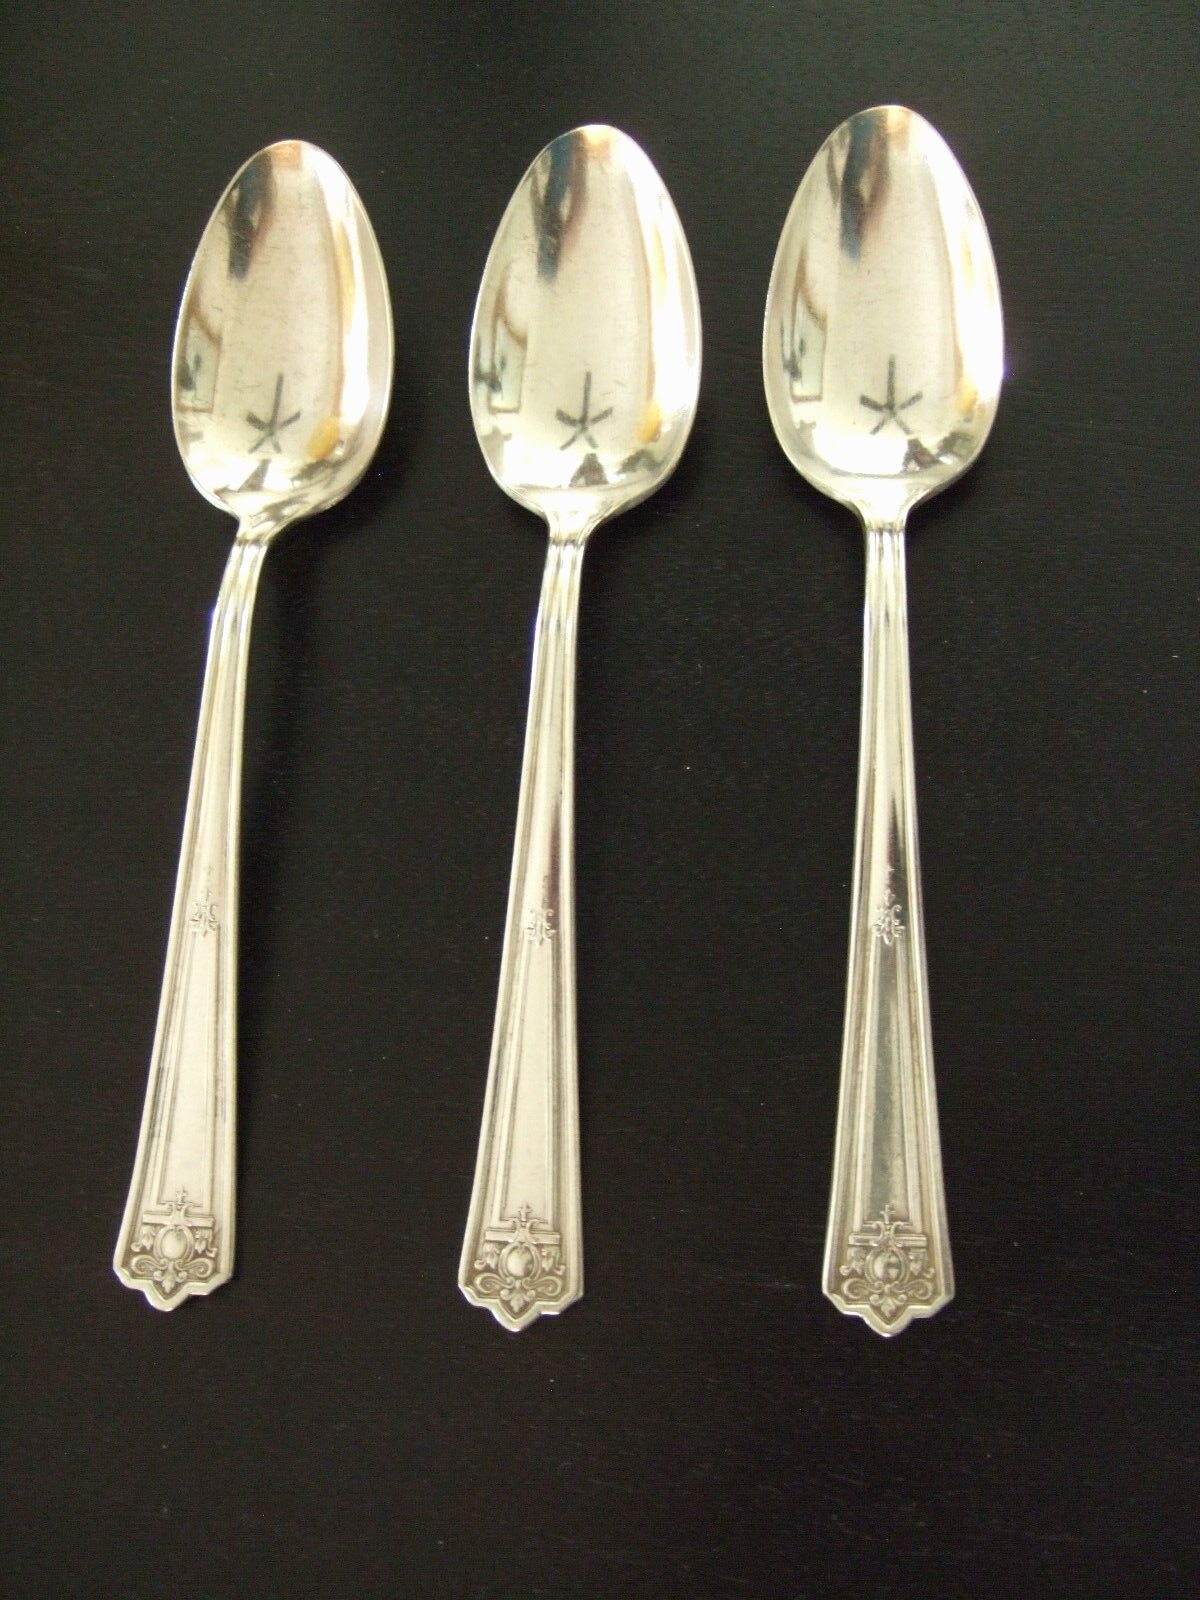 3 OVAL BOWL SOUP SPOONS ROGERS & BRO XII SILVERPLATE 1928 MAJESTIC PATTERN 7 1/4 - $10.49